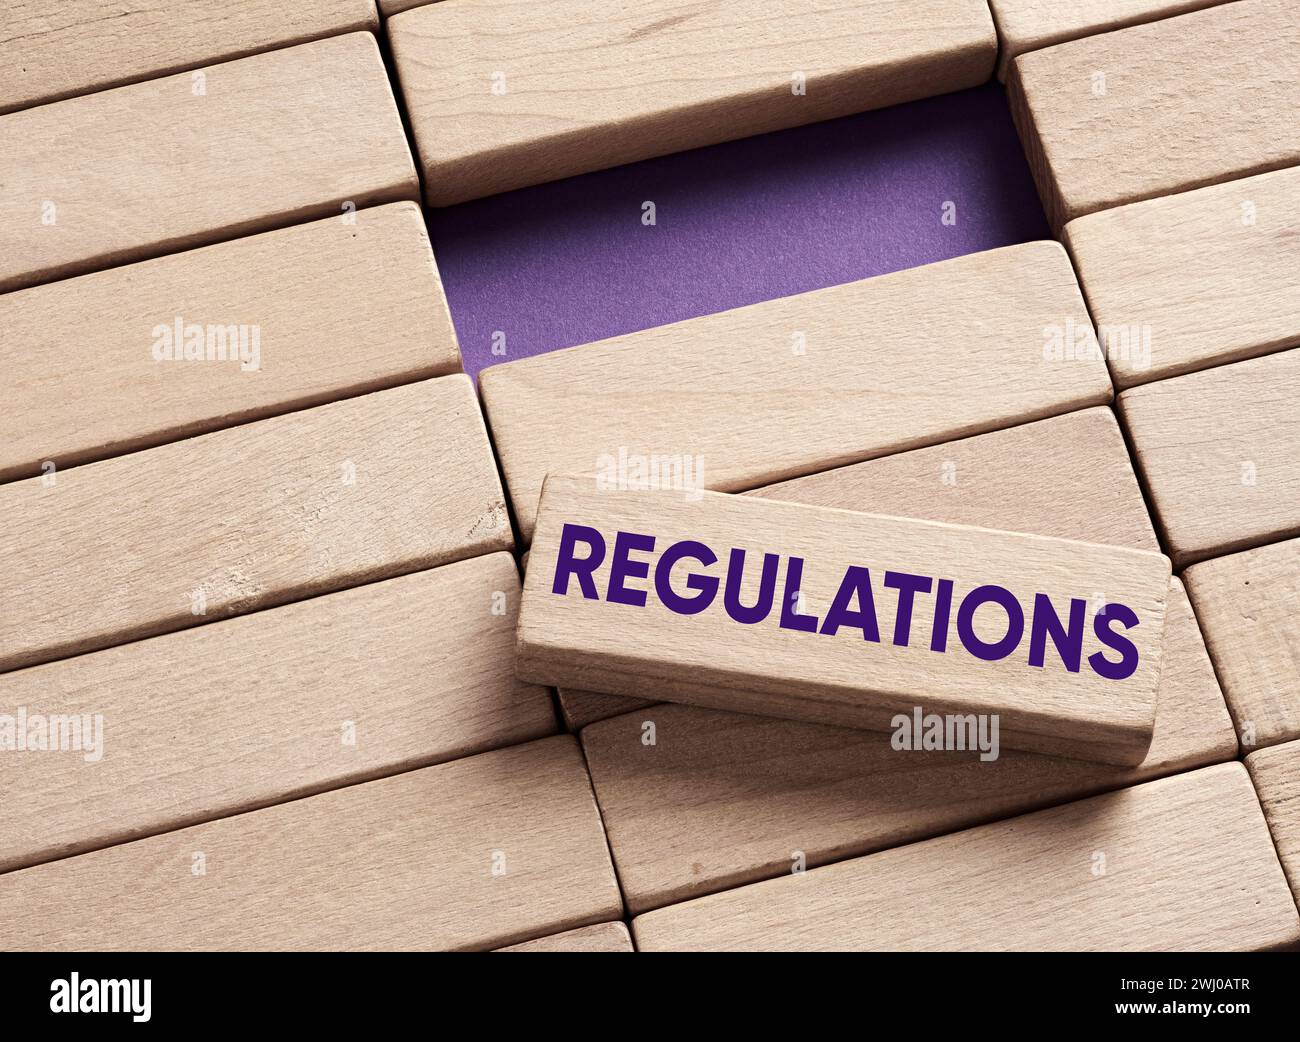 The word regulations on wooden blocks. Rules, laws, procedures and policies to comply. Stock Photo